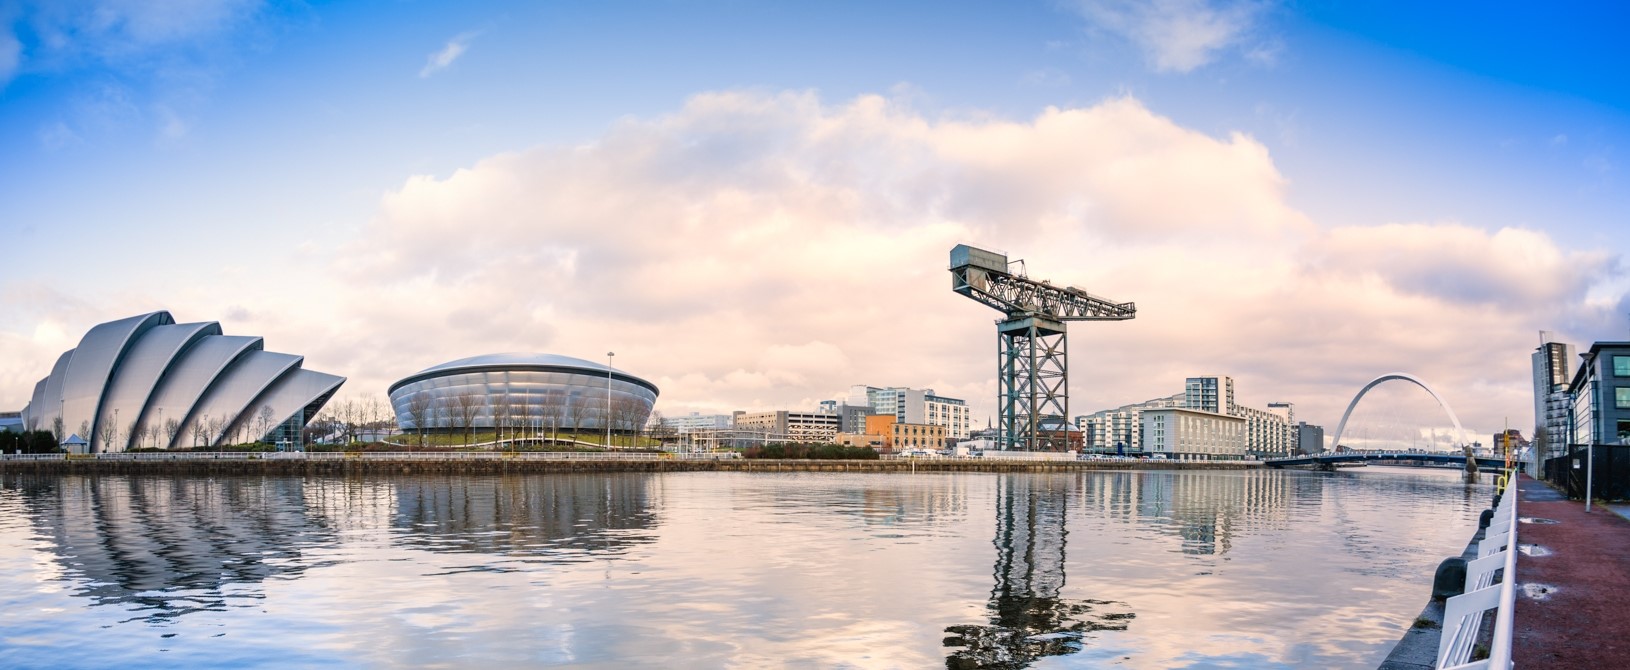 The River Clyde with the Scottish exhibition centre and Science Center in view